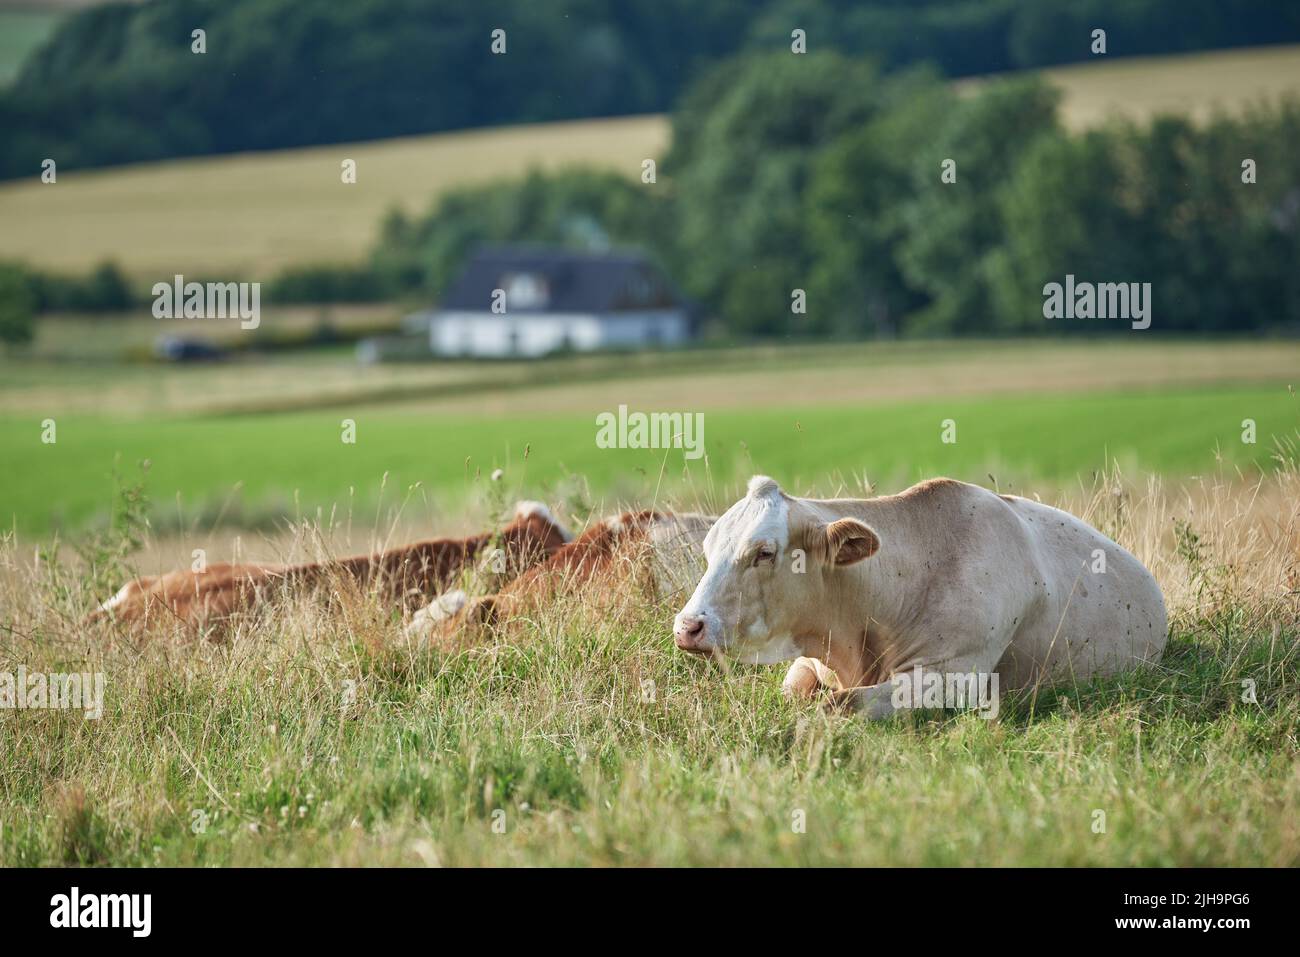 Brown and white cows lying on a field and farmland in the background with copy space. Cattle or livestock animals on a sustainable agricultural farm Stock Photo